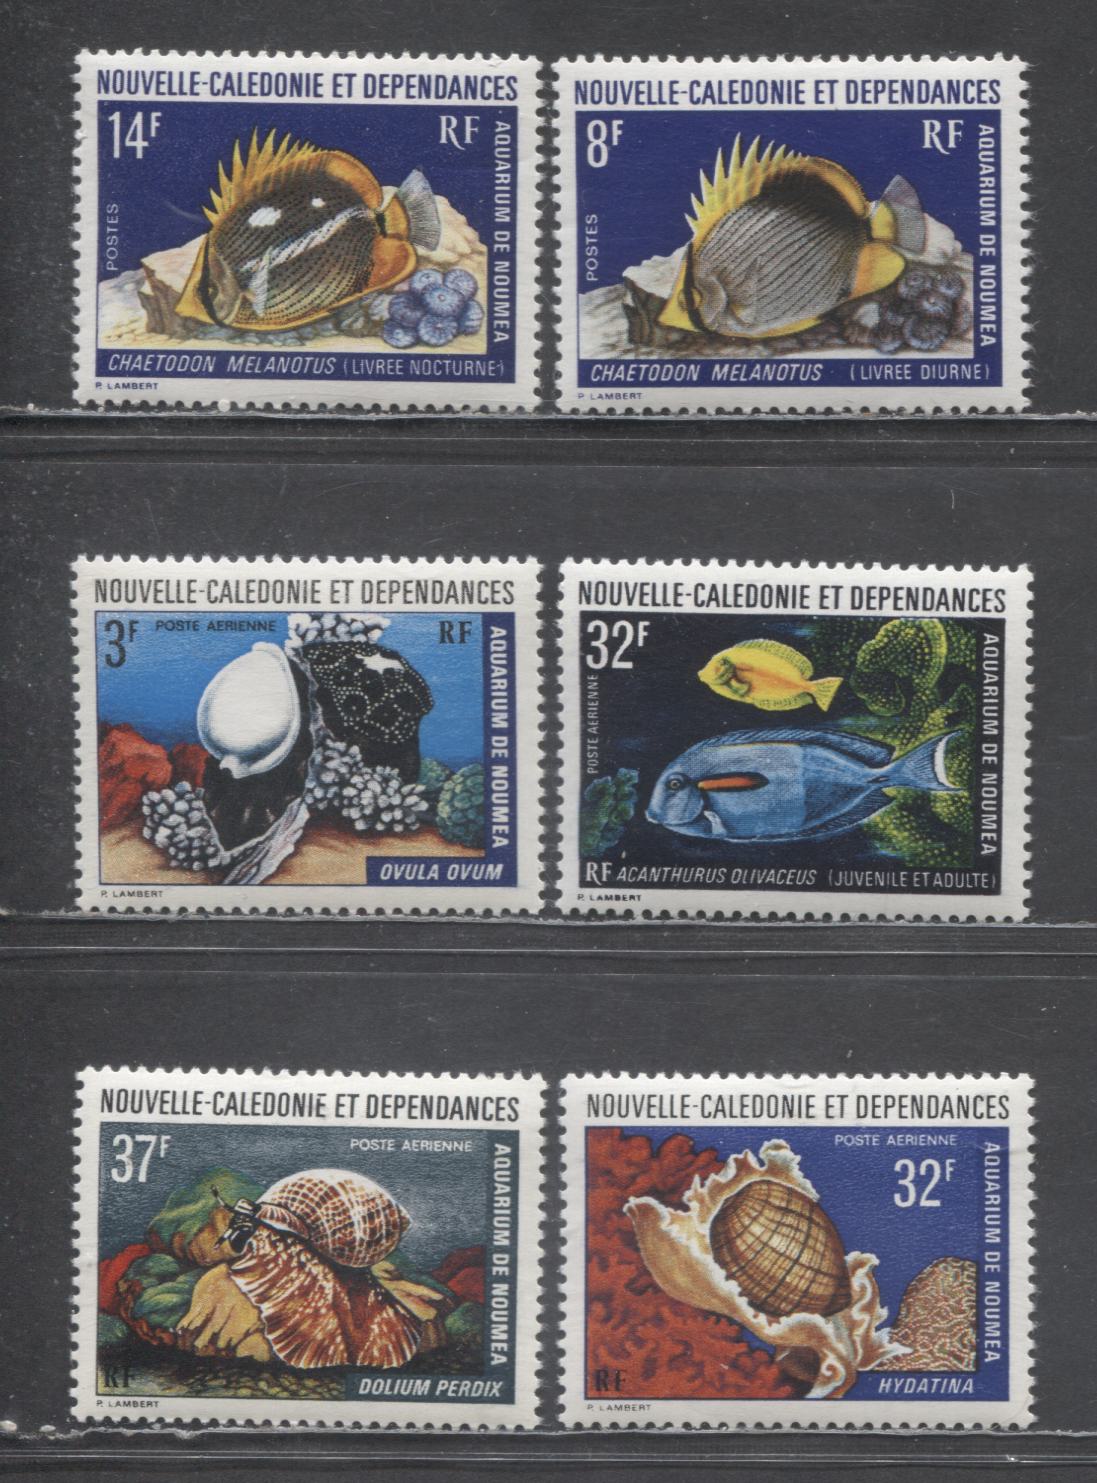 Lot 121 New Caledonia SC#403/C113 1973-1974 Butterfly Fish - Noumea Aquarium Issues, 6 VFOG Singles, Click on Listing to See ALL Pictures, 2017 Scott Cat. $21.75